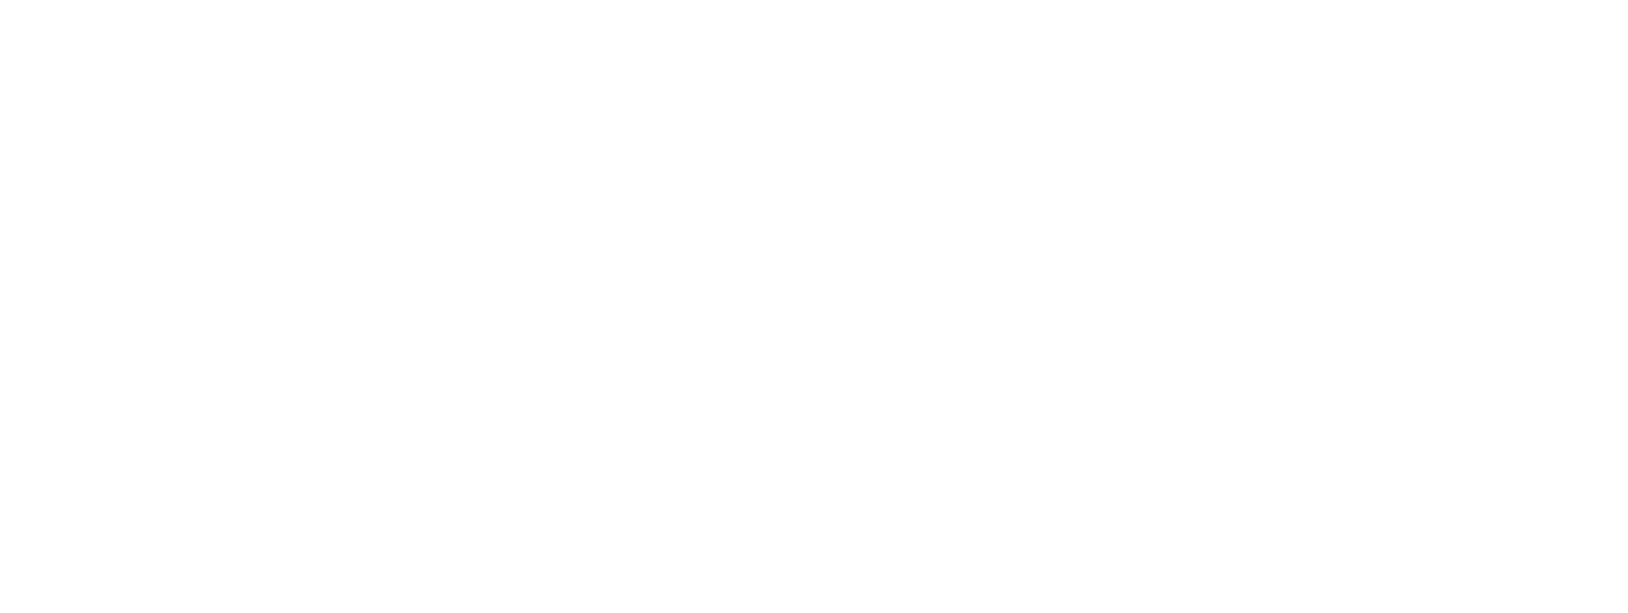 FromCounsel White with padding